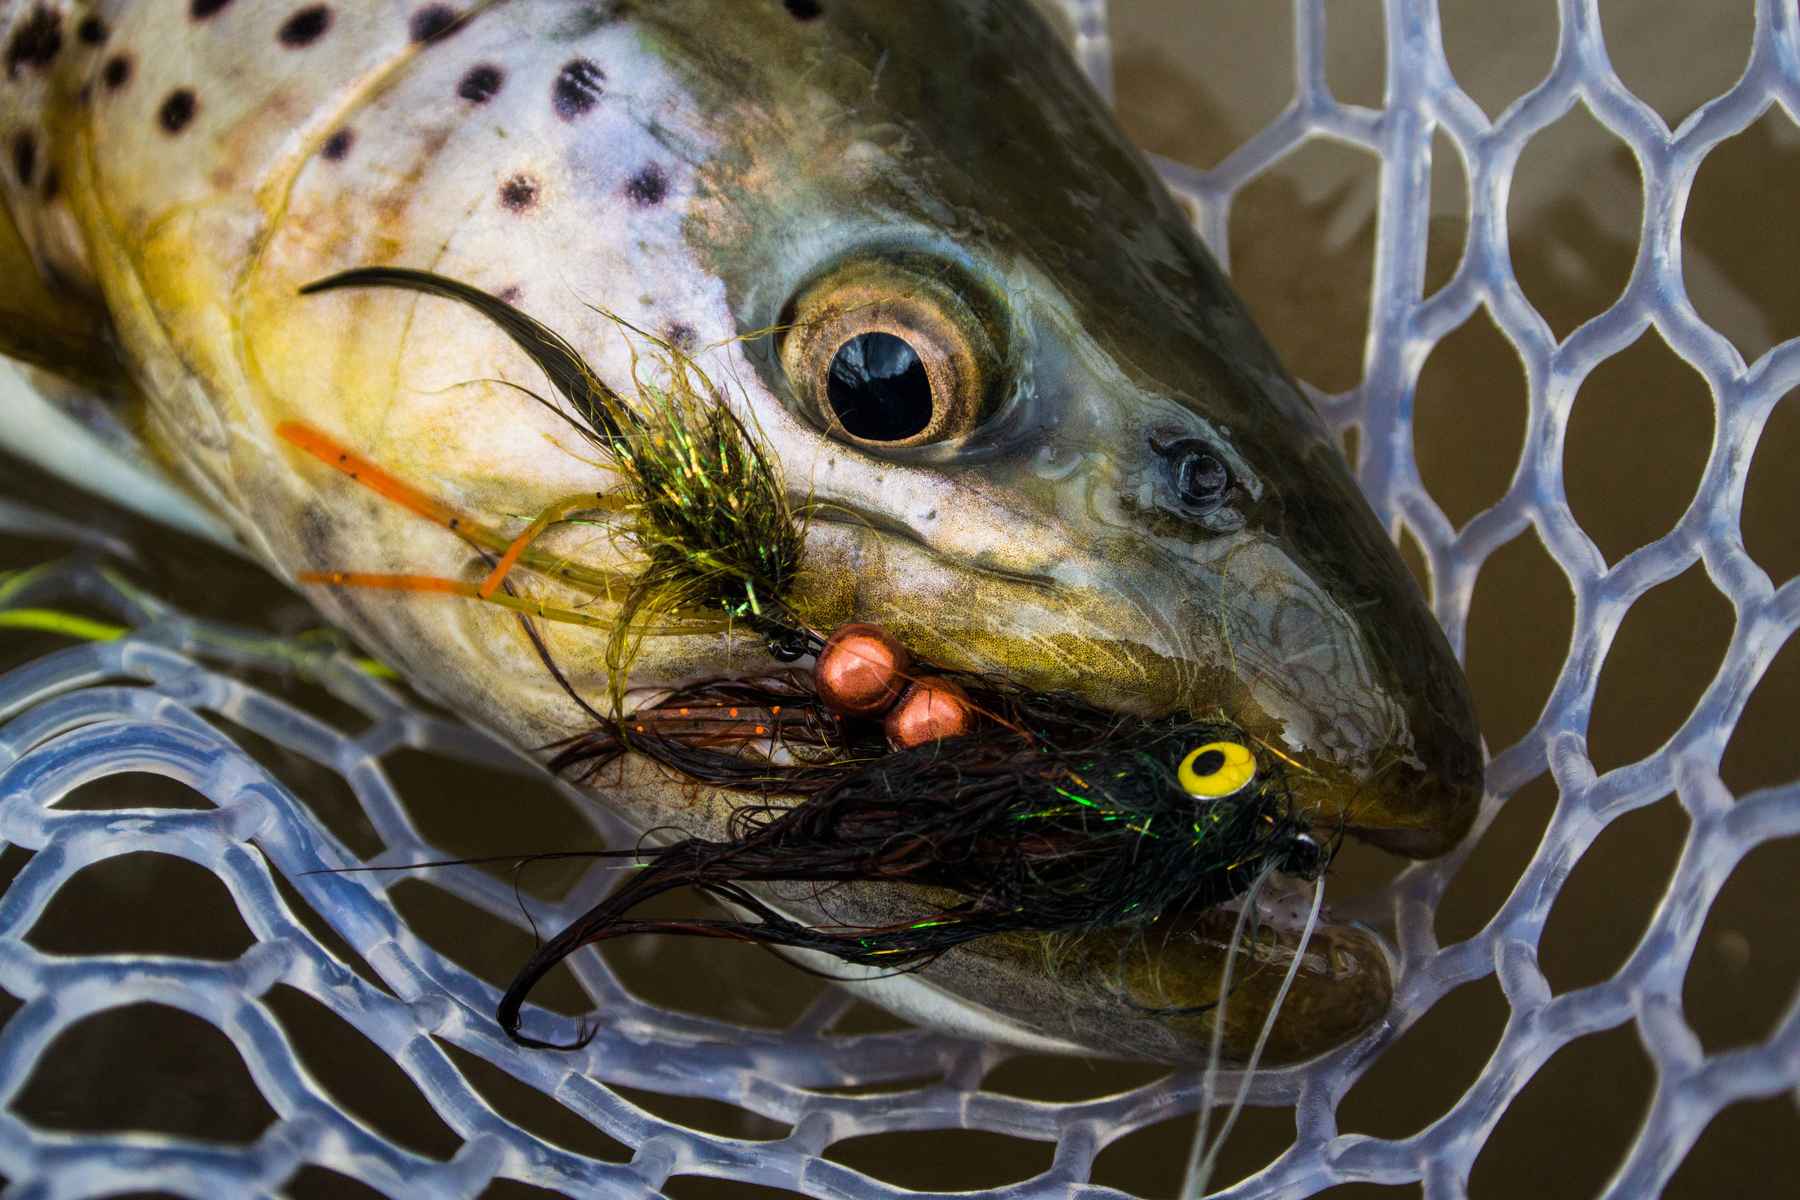 One more streamer tip: Sculpins up and fast